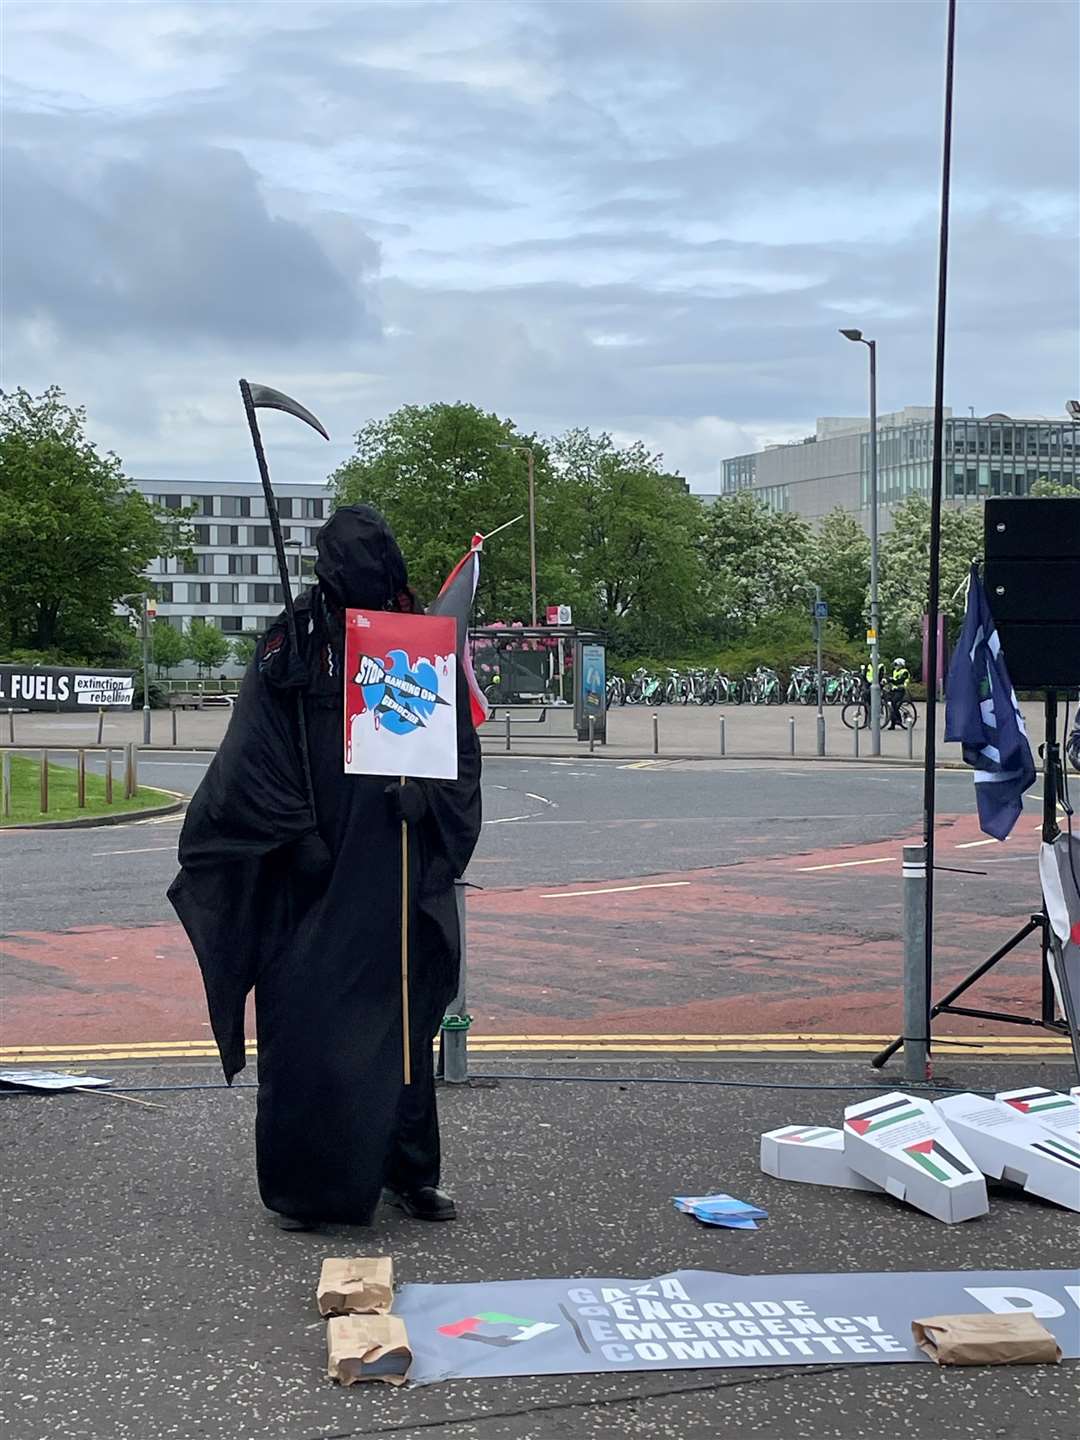 A demonstrator dressed as the Grim Reaper, as protesters gather outside the Barclays AGM at the SEC in Glasgow (Lucinda Cameron/PA)